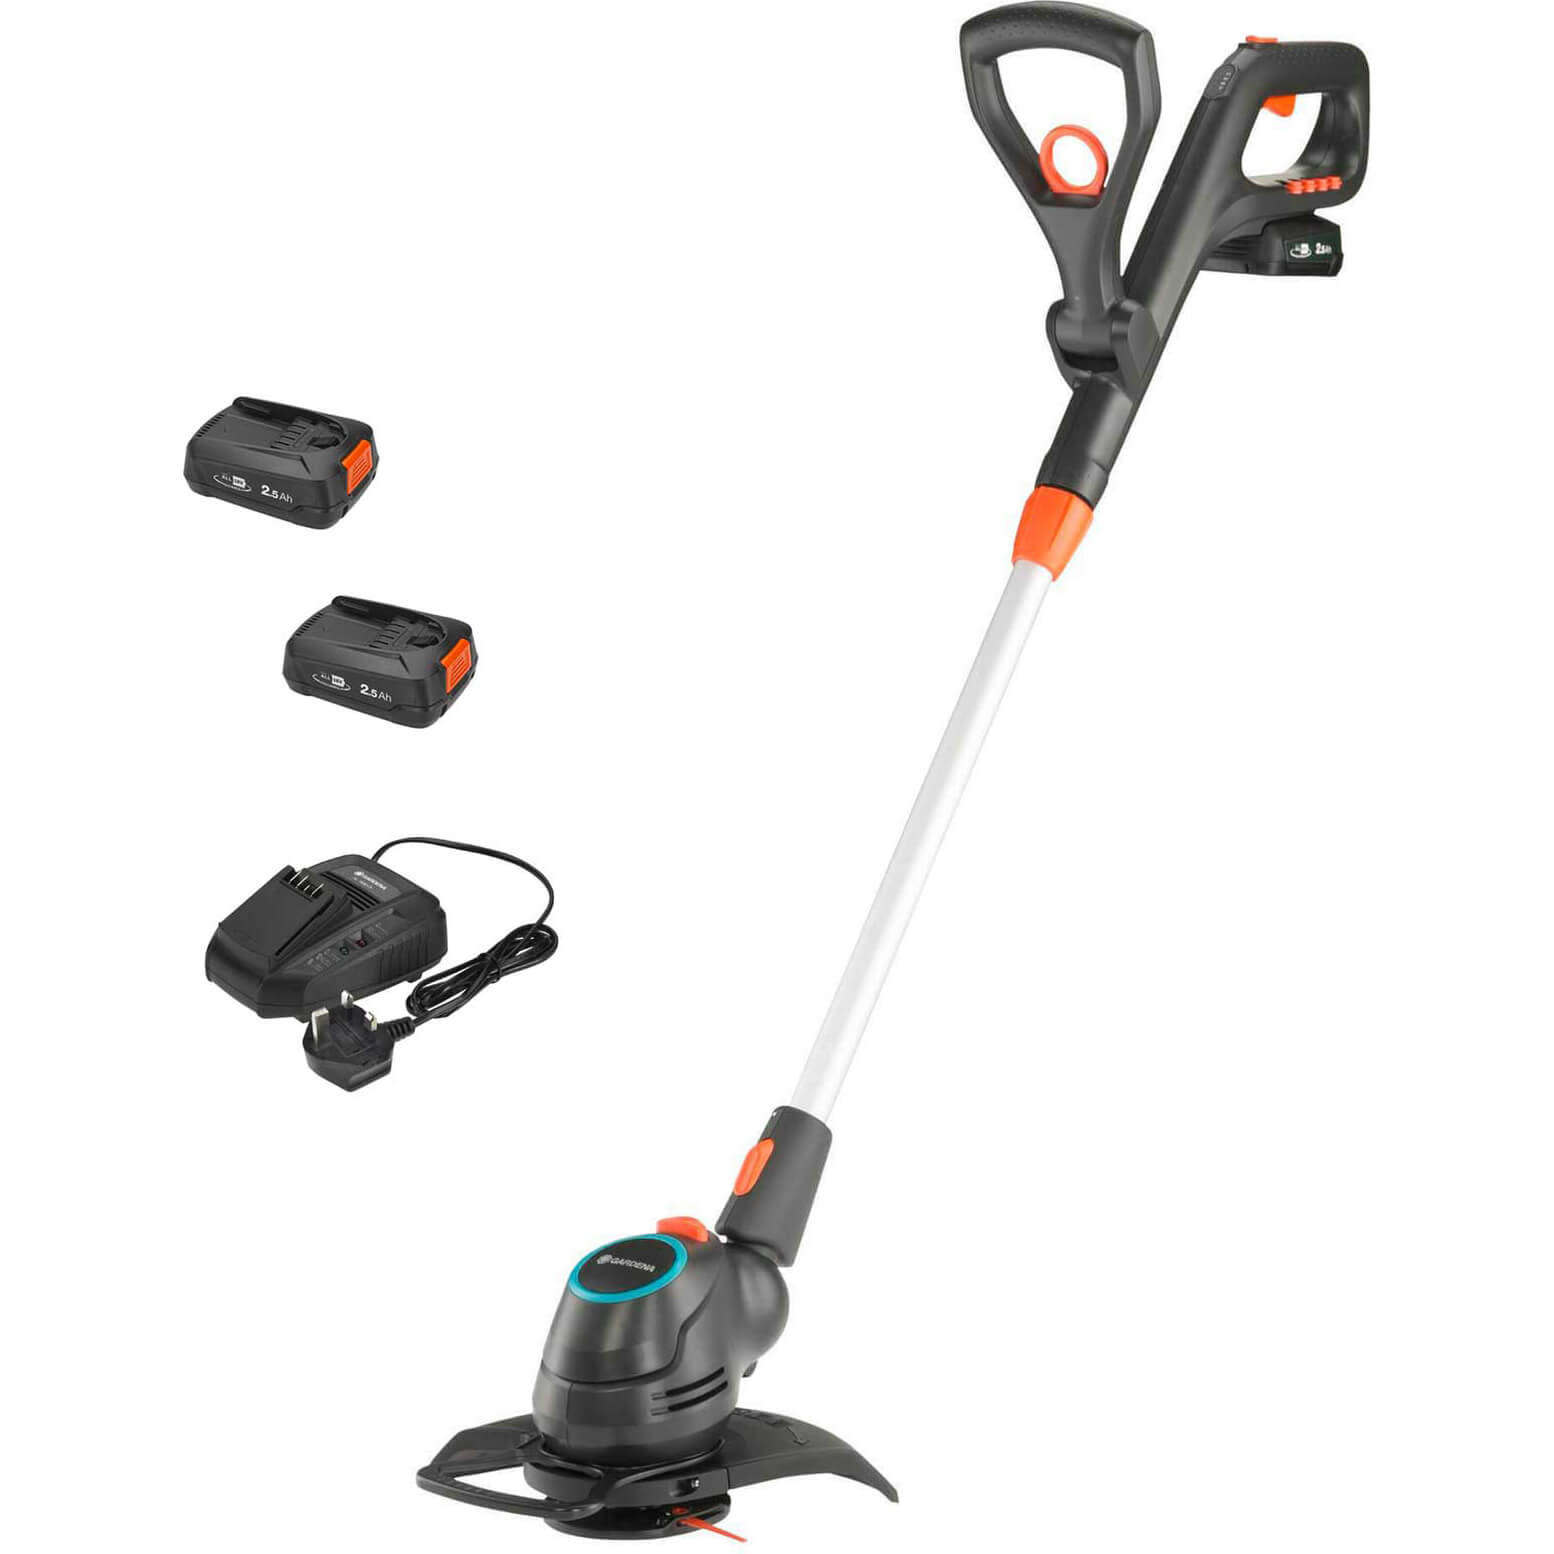 Image of Gardena COMFORTCUT 23 P4A 18v Cordless Grass Trimmer and Edger 230mm 2 x 2.5ah Li-ion Charger